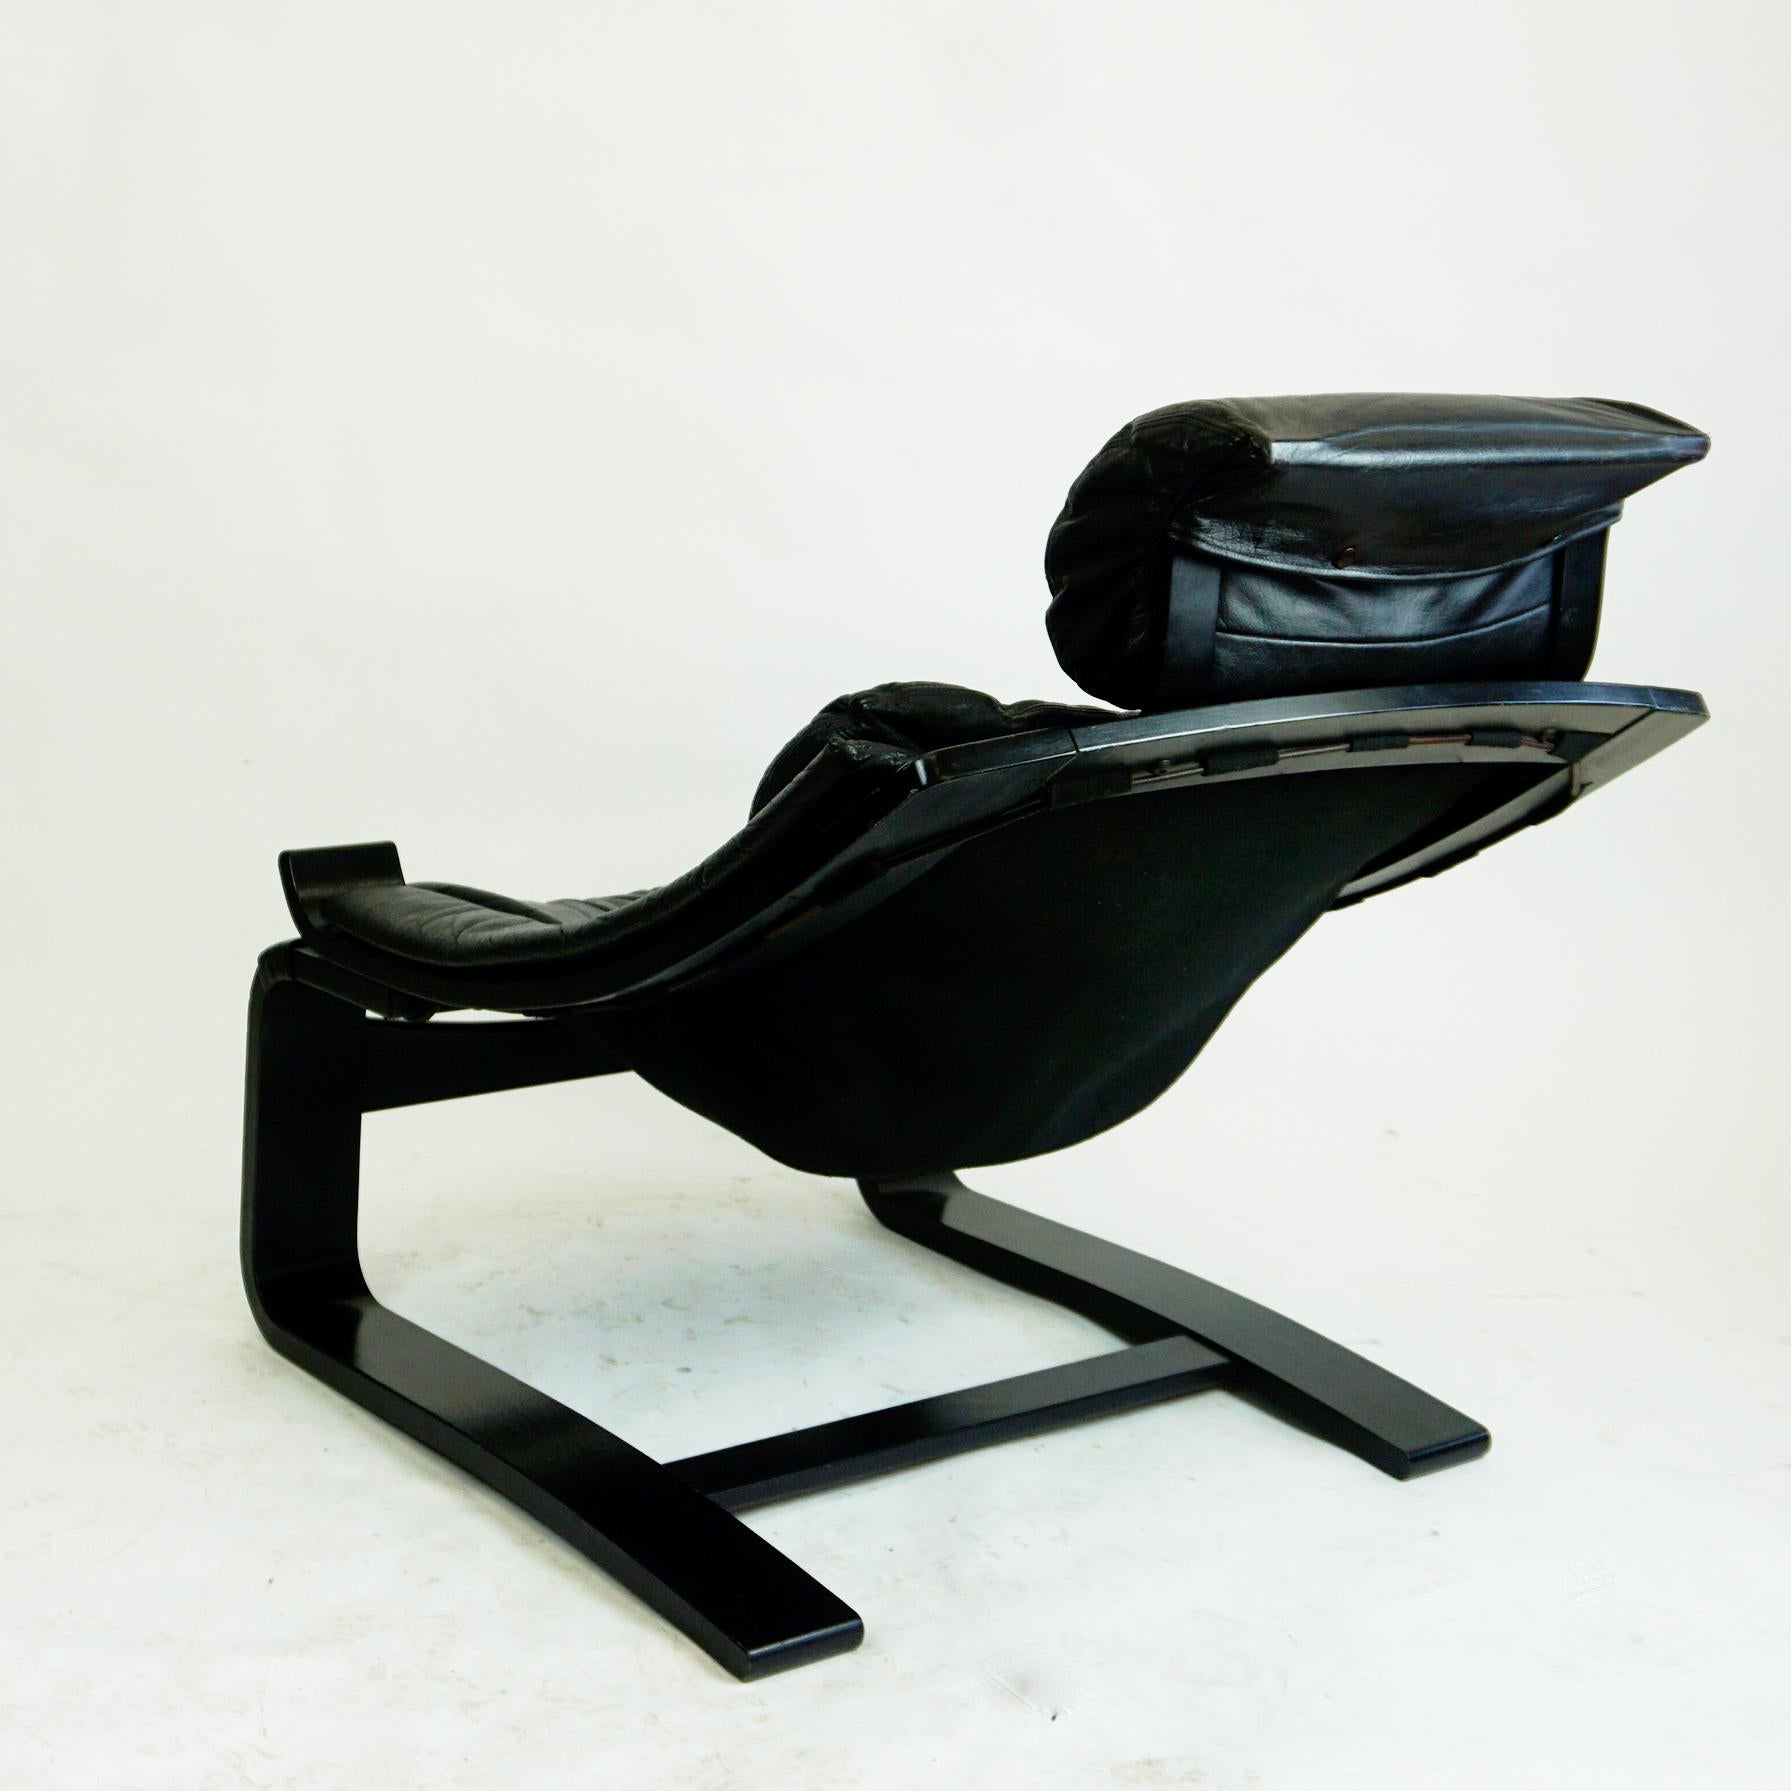 Late 20th Century Scandinavian Black Leather Kroken Lounge Chair by Ake Fribytter for Nelo Sweden